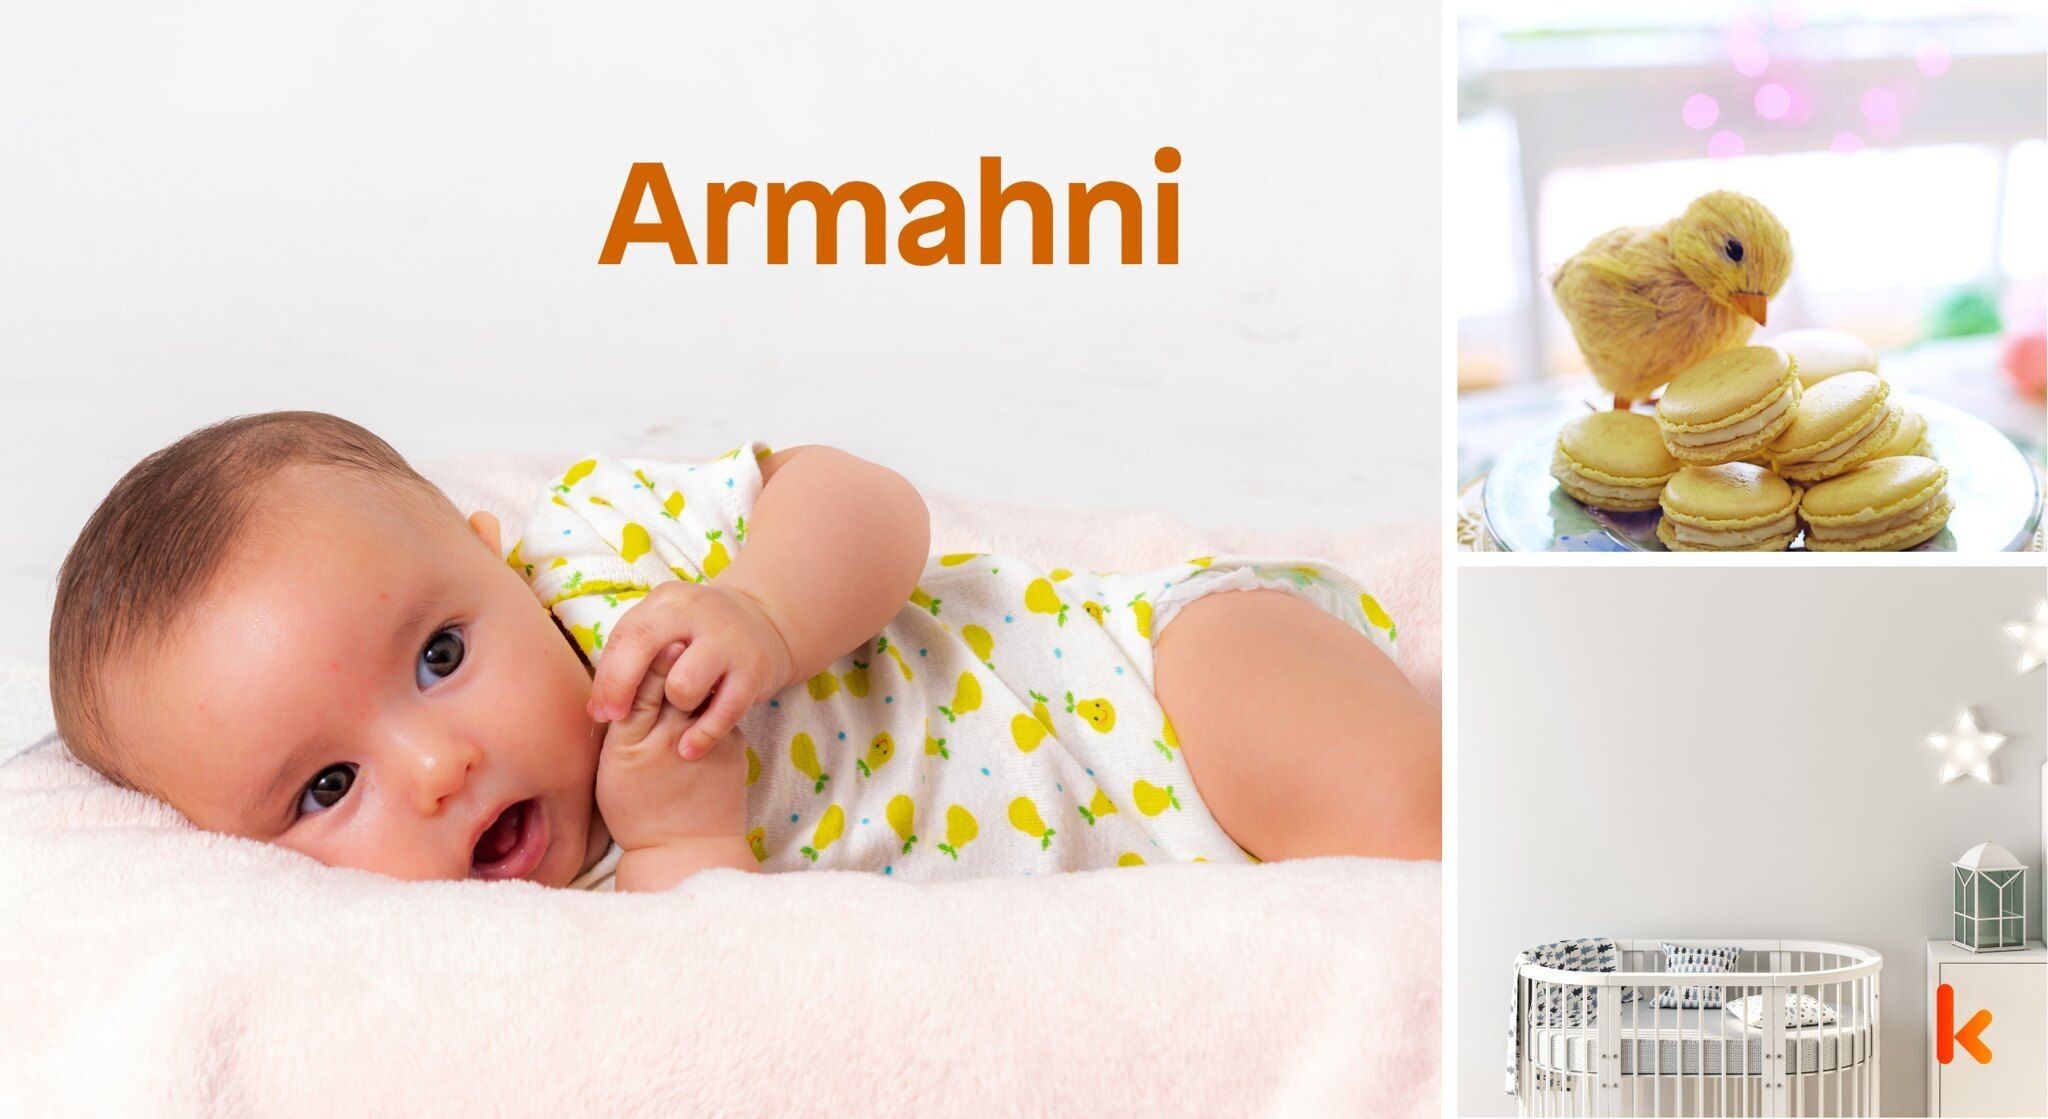 Meaning of the name Armahni